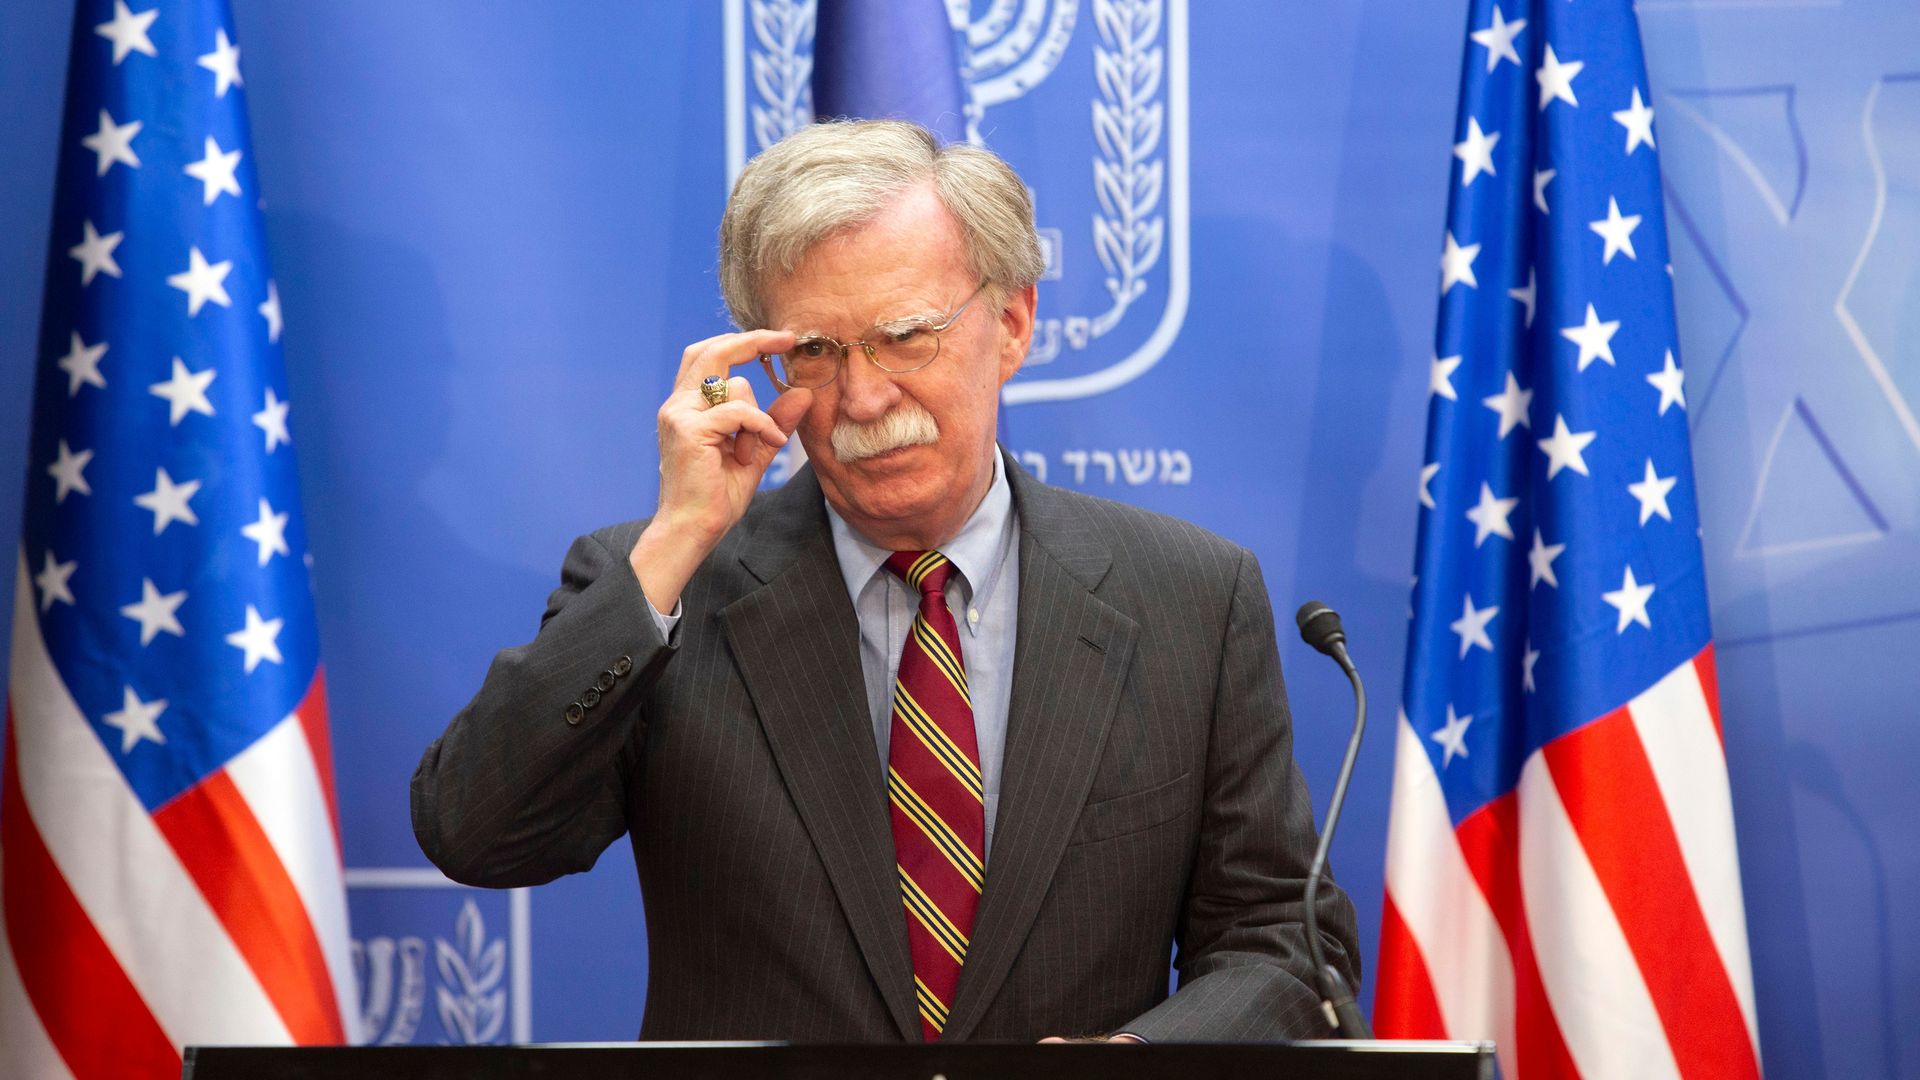 Then-national security adviser John Bolton gives a press conference in Jerusalem on August 20, 2018.